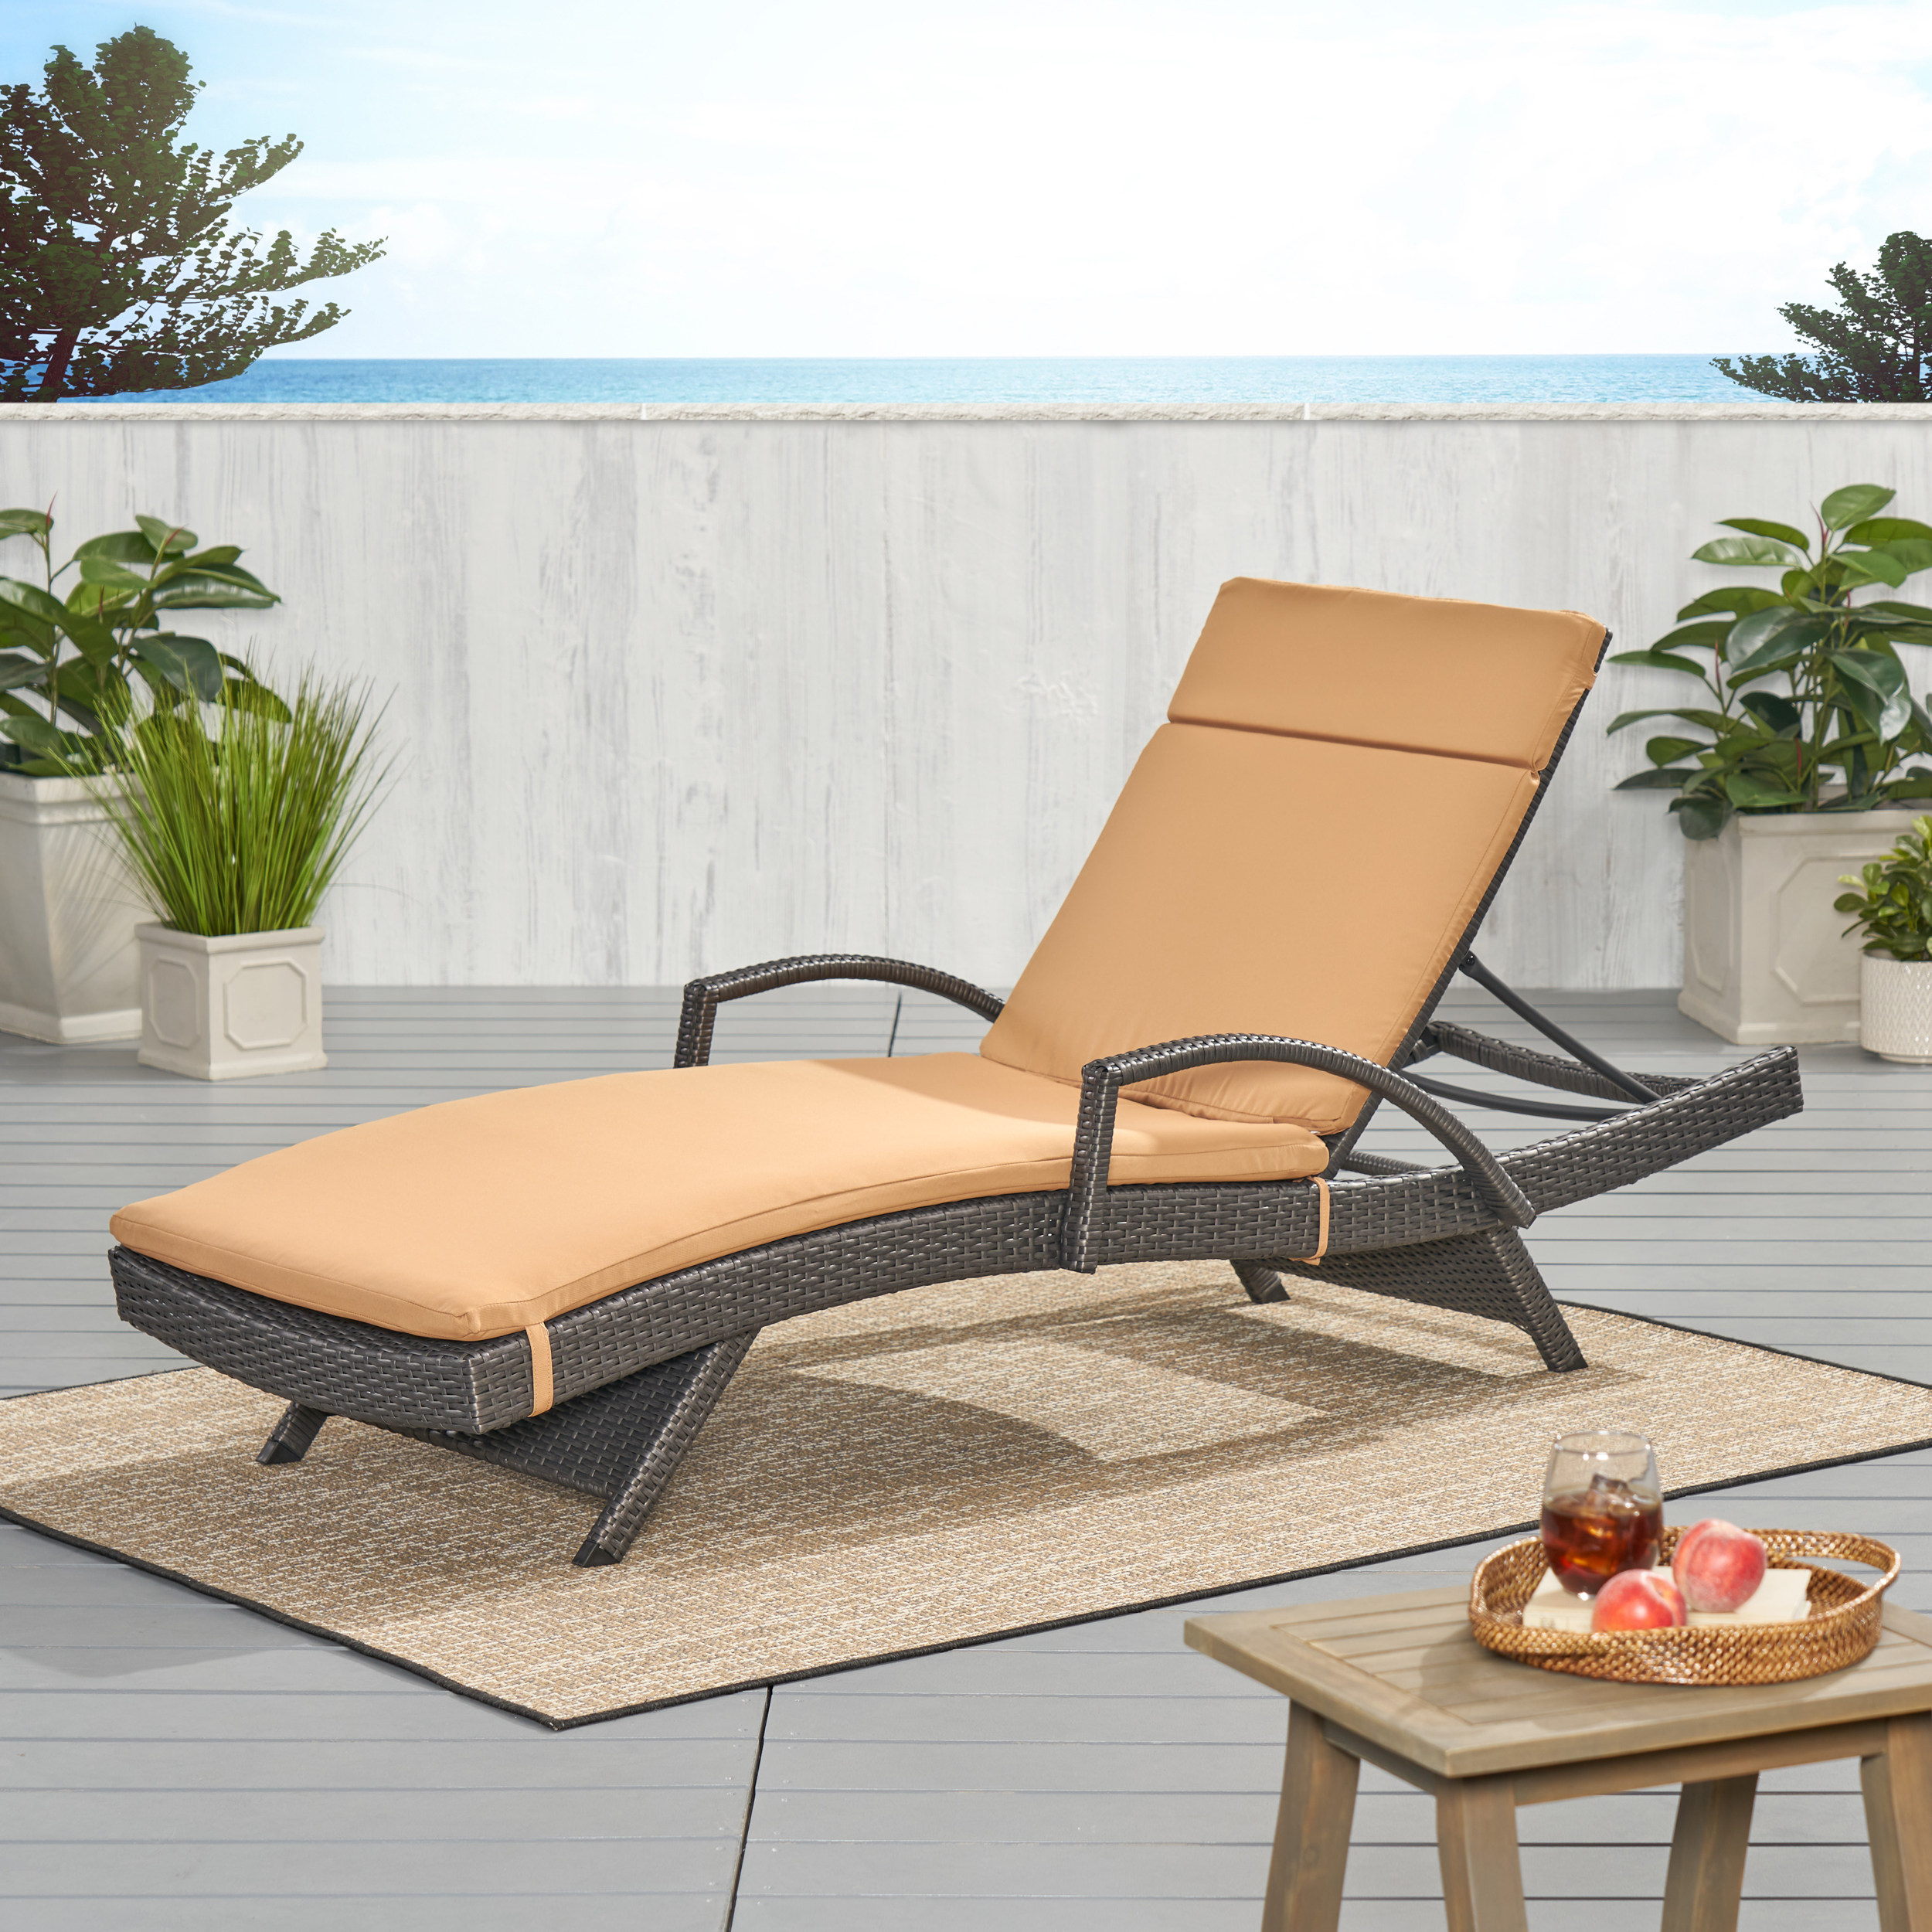 Soleil Outdoor Water Resistant Chaise Lounge Cushion - Caramel